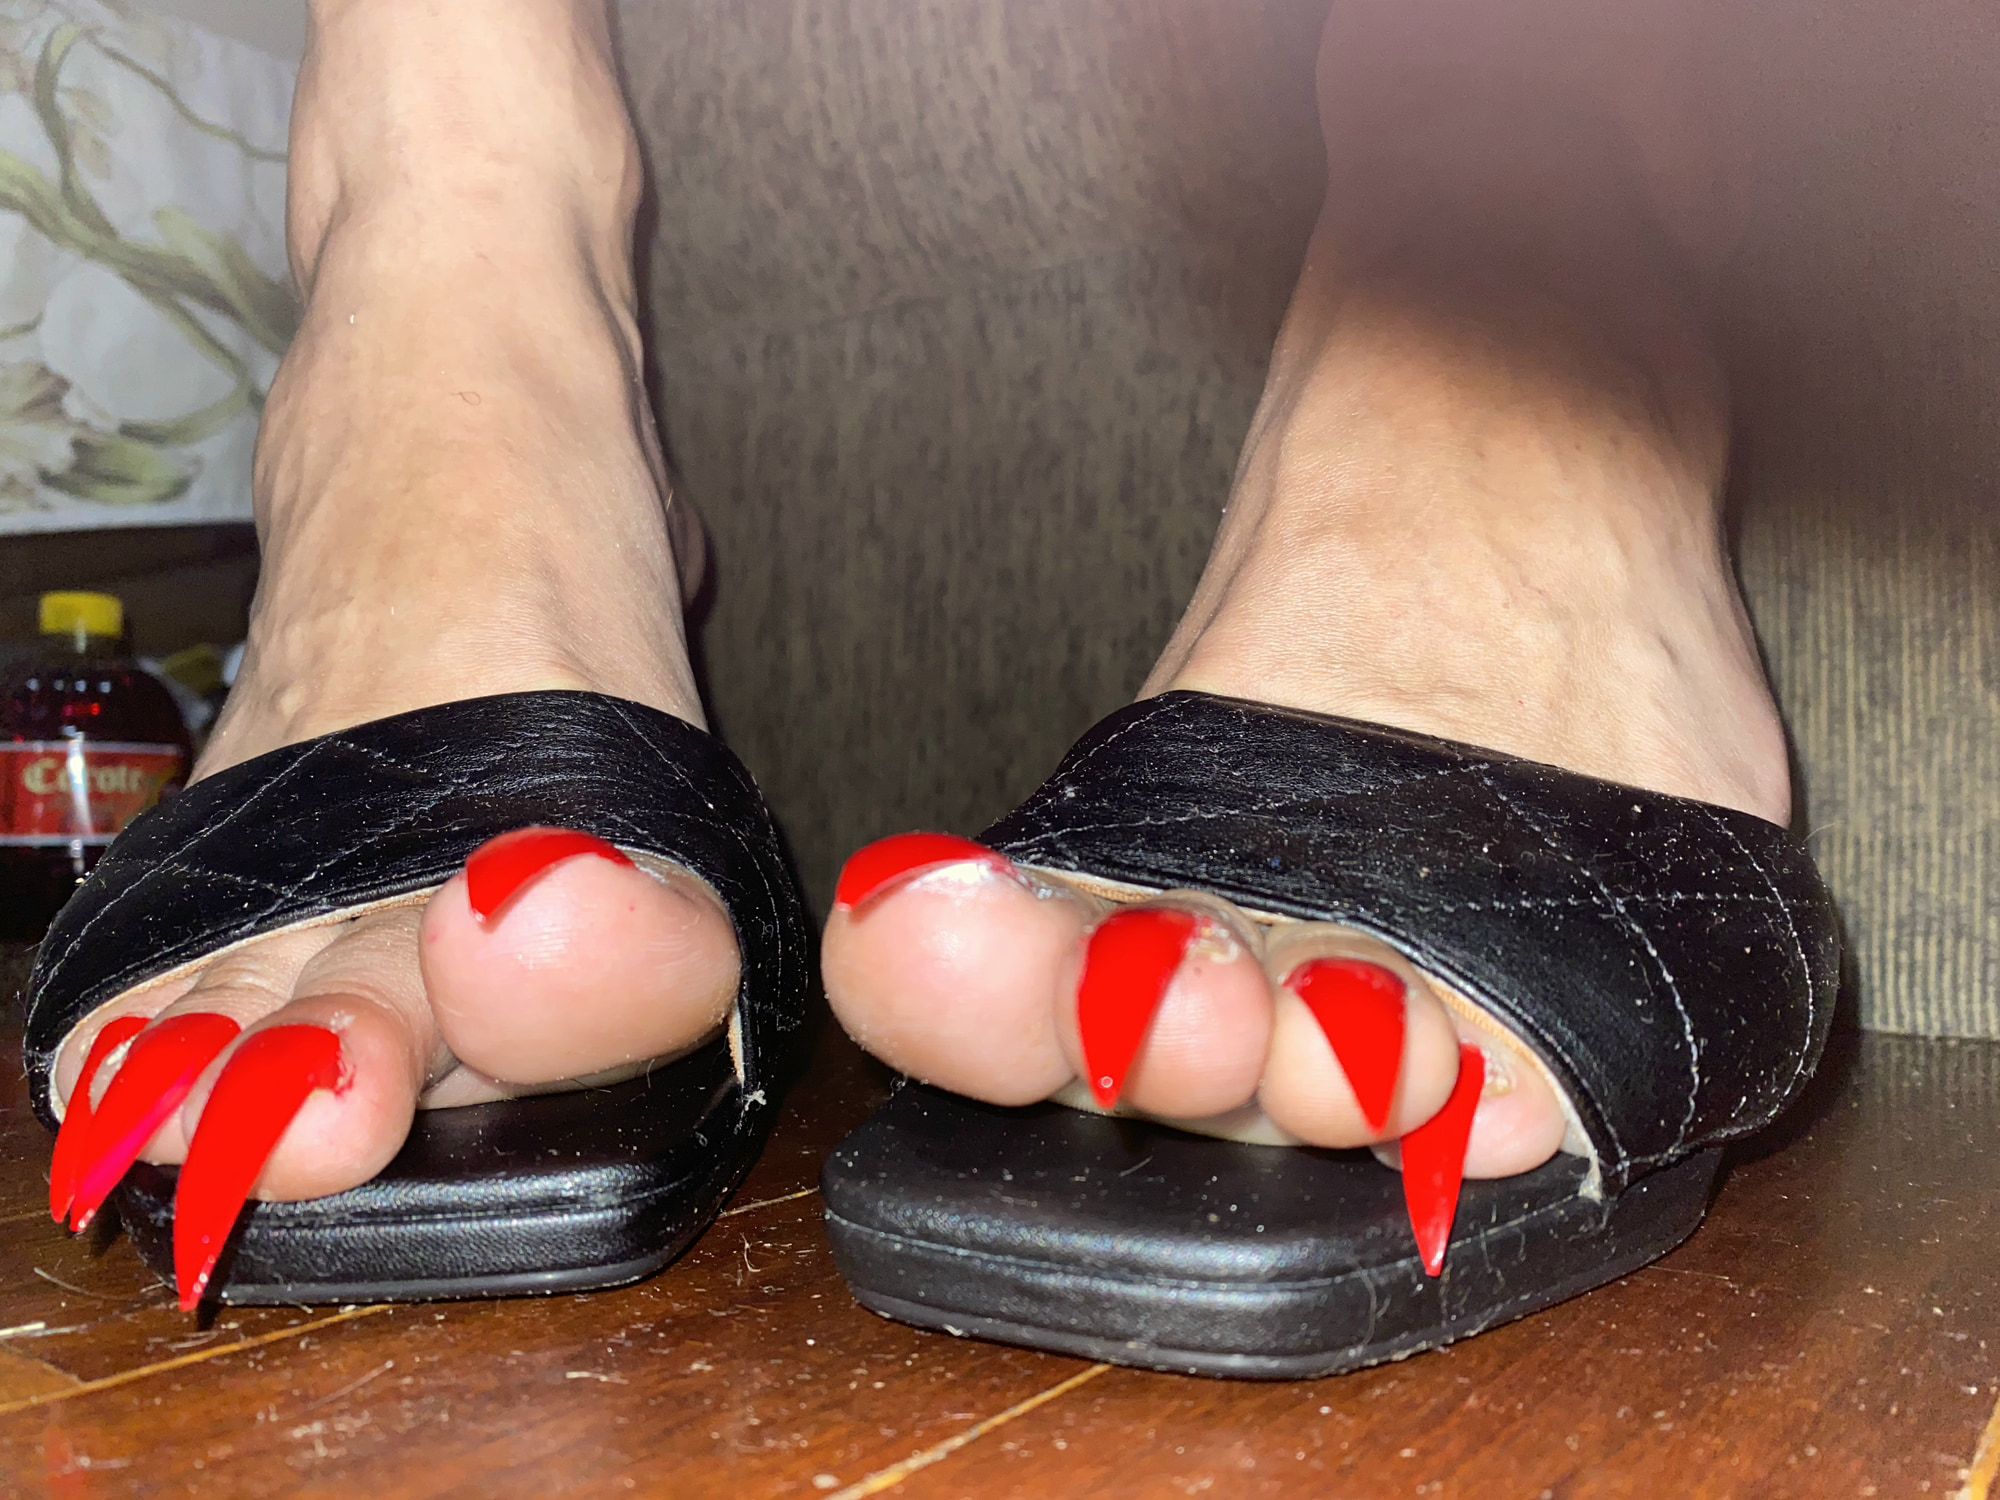 Some old pictures of my feet with long toenails, sandals... #19